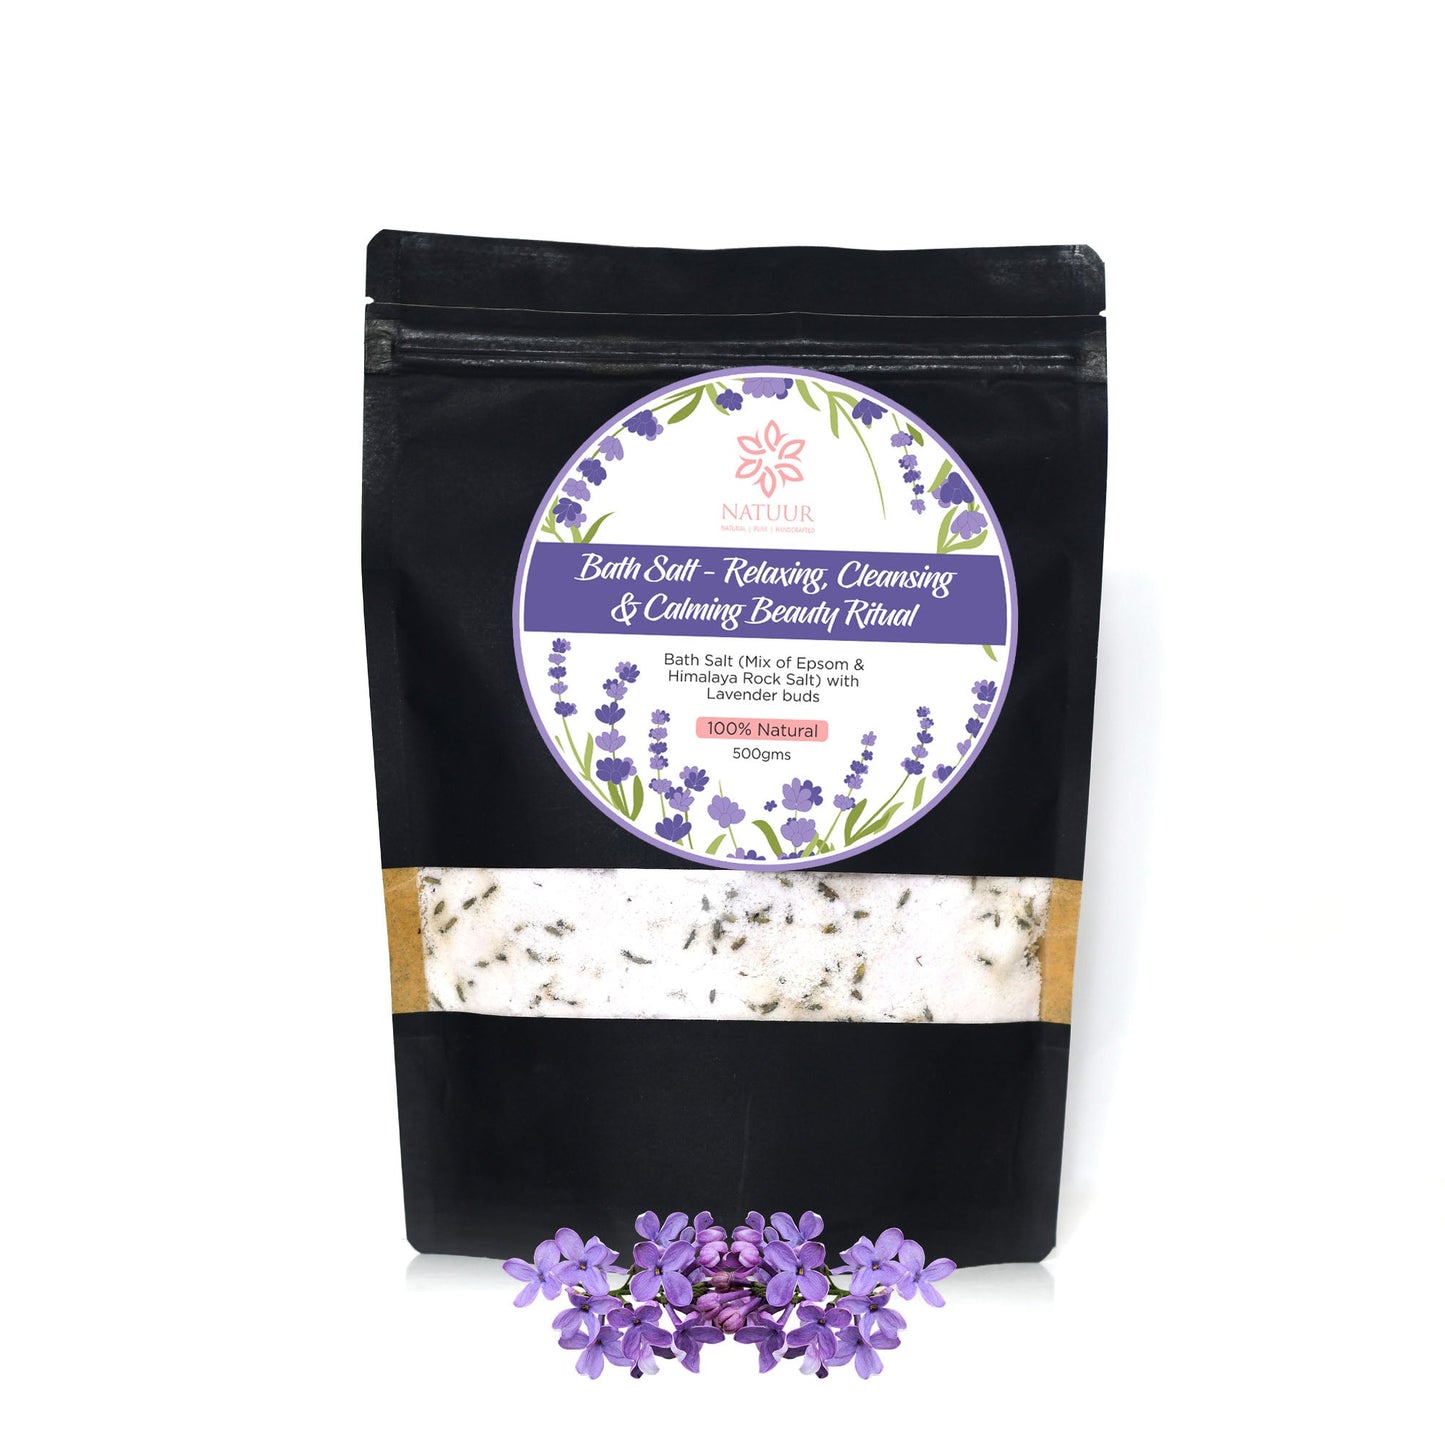 Bath Salt with Epsom Salt and Lavender buds - Relaxing , Cleansing & Calminng Beauty Ritual